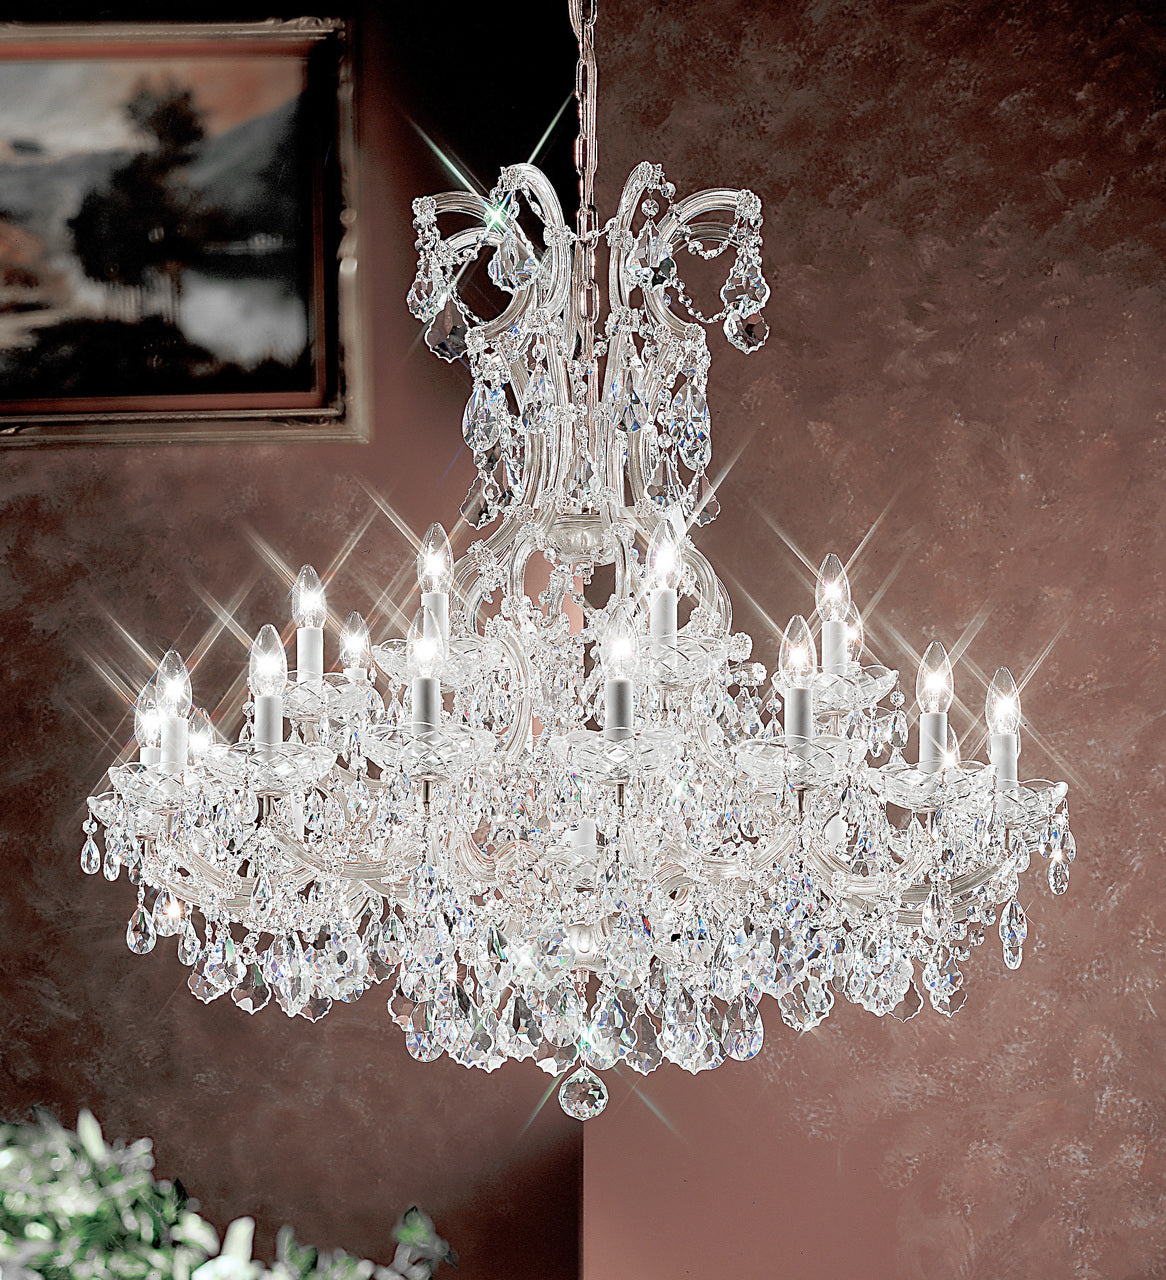 Classic Lighting 8159 CH S Maria Theresa Traditional Crystal Chandelier in Chrome (Imported from Italy)